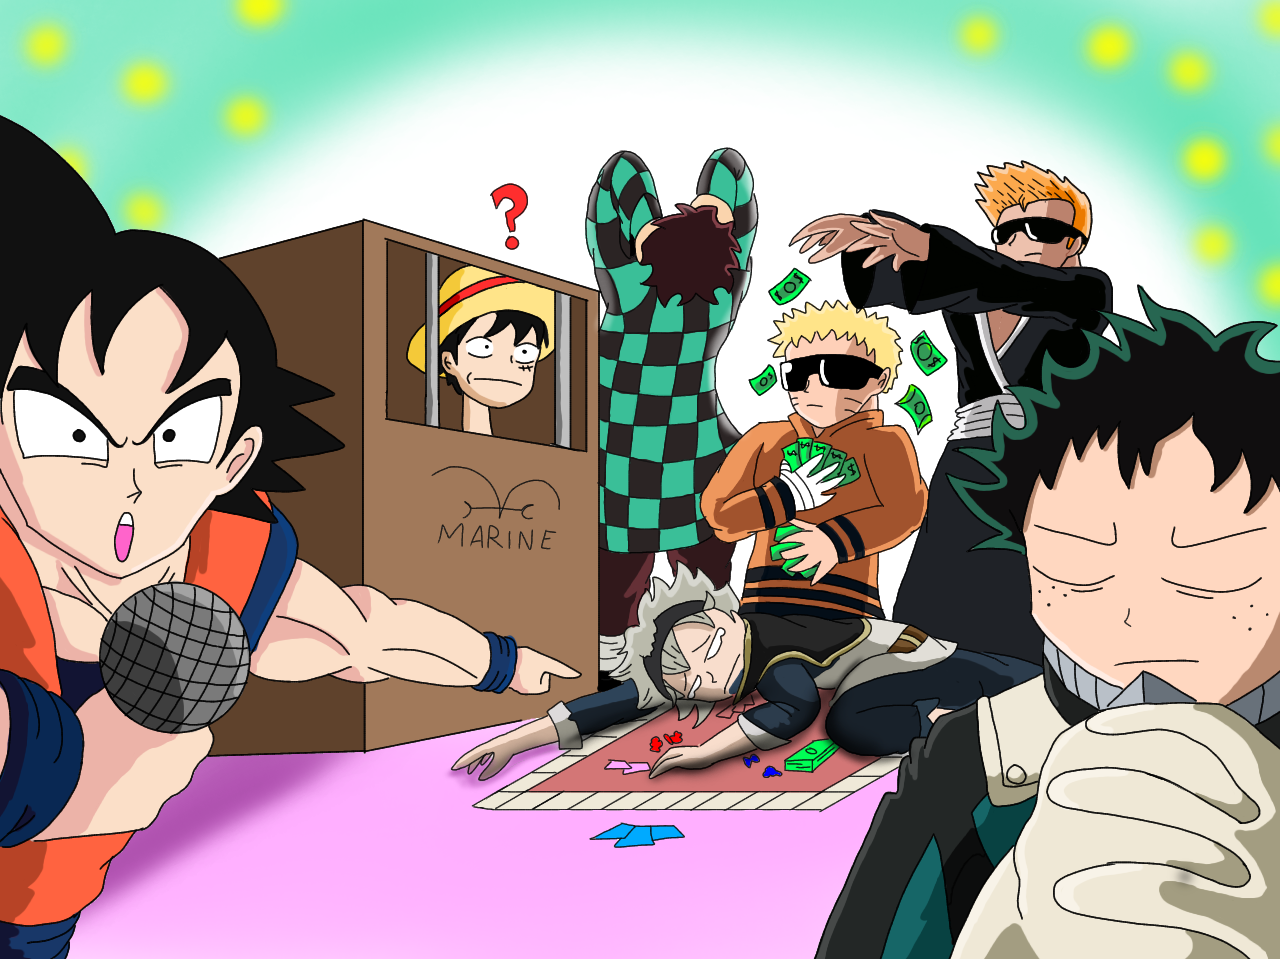 Animangaverse crossover anime funny moment by CANDY-PARTY-MAN on DeviantArt